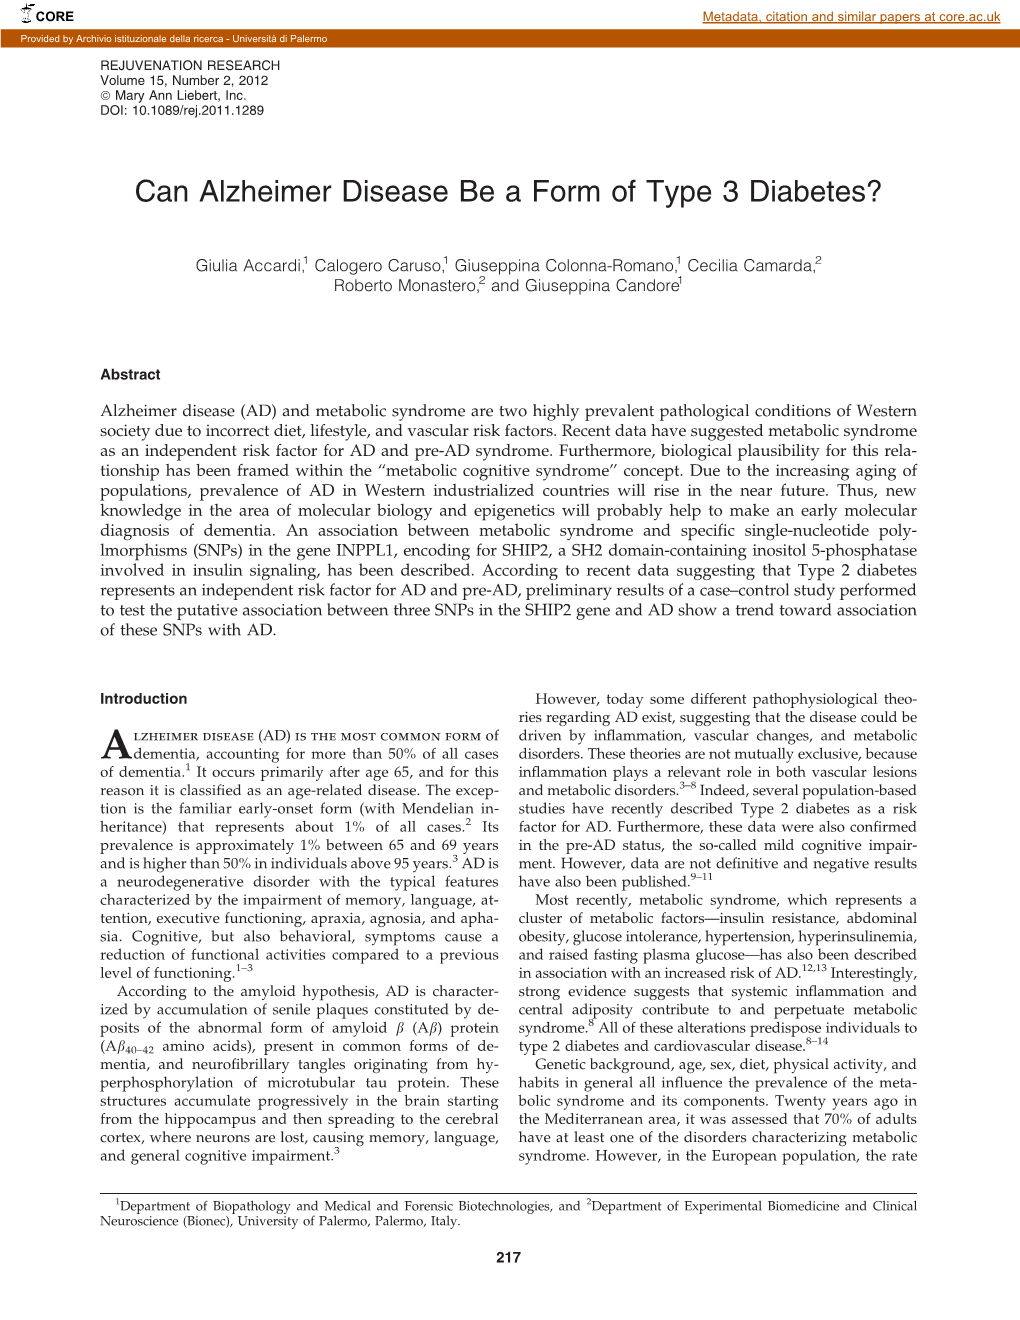 Can Alzheimer Disease Be a Form of Type 3 Diabetes?